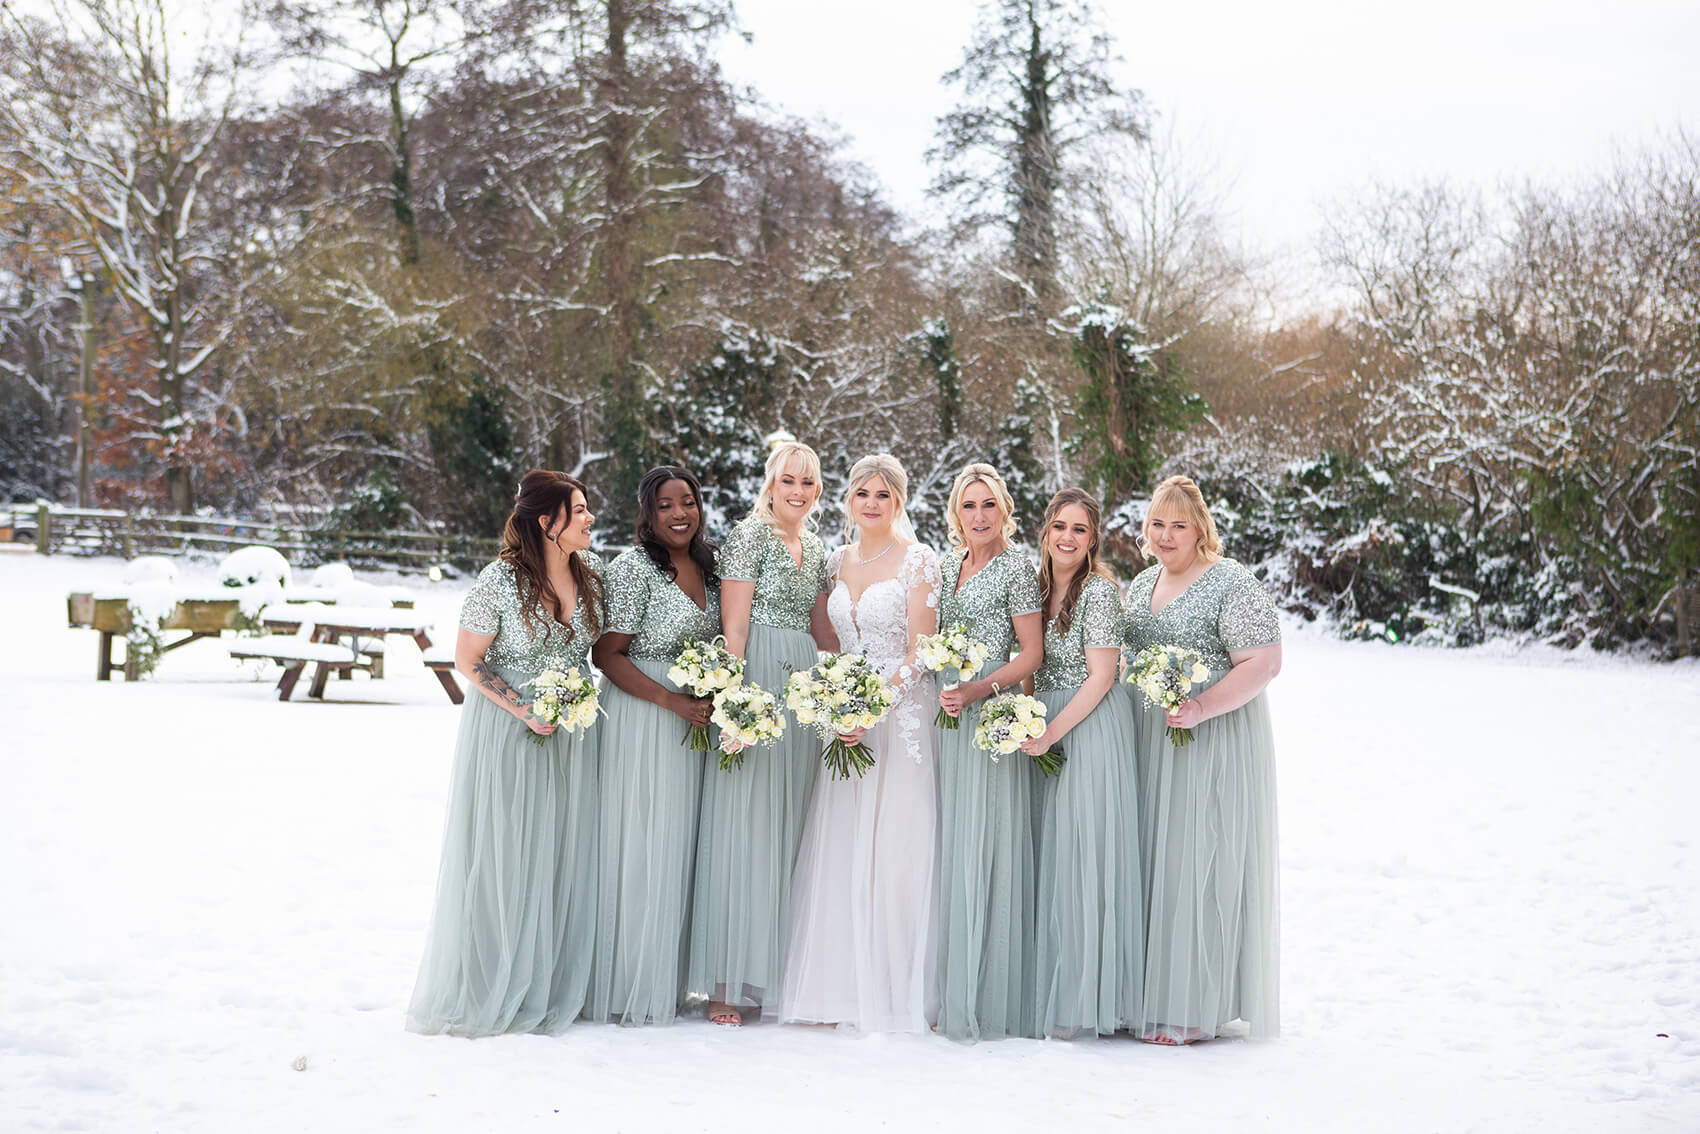 The bridal party standing in the snow